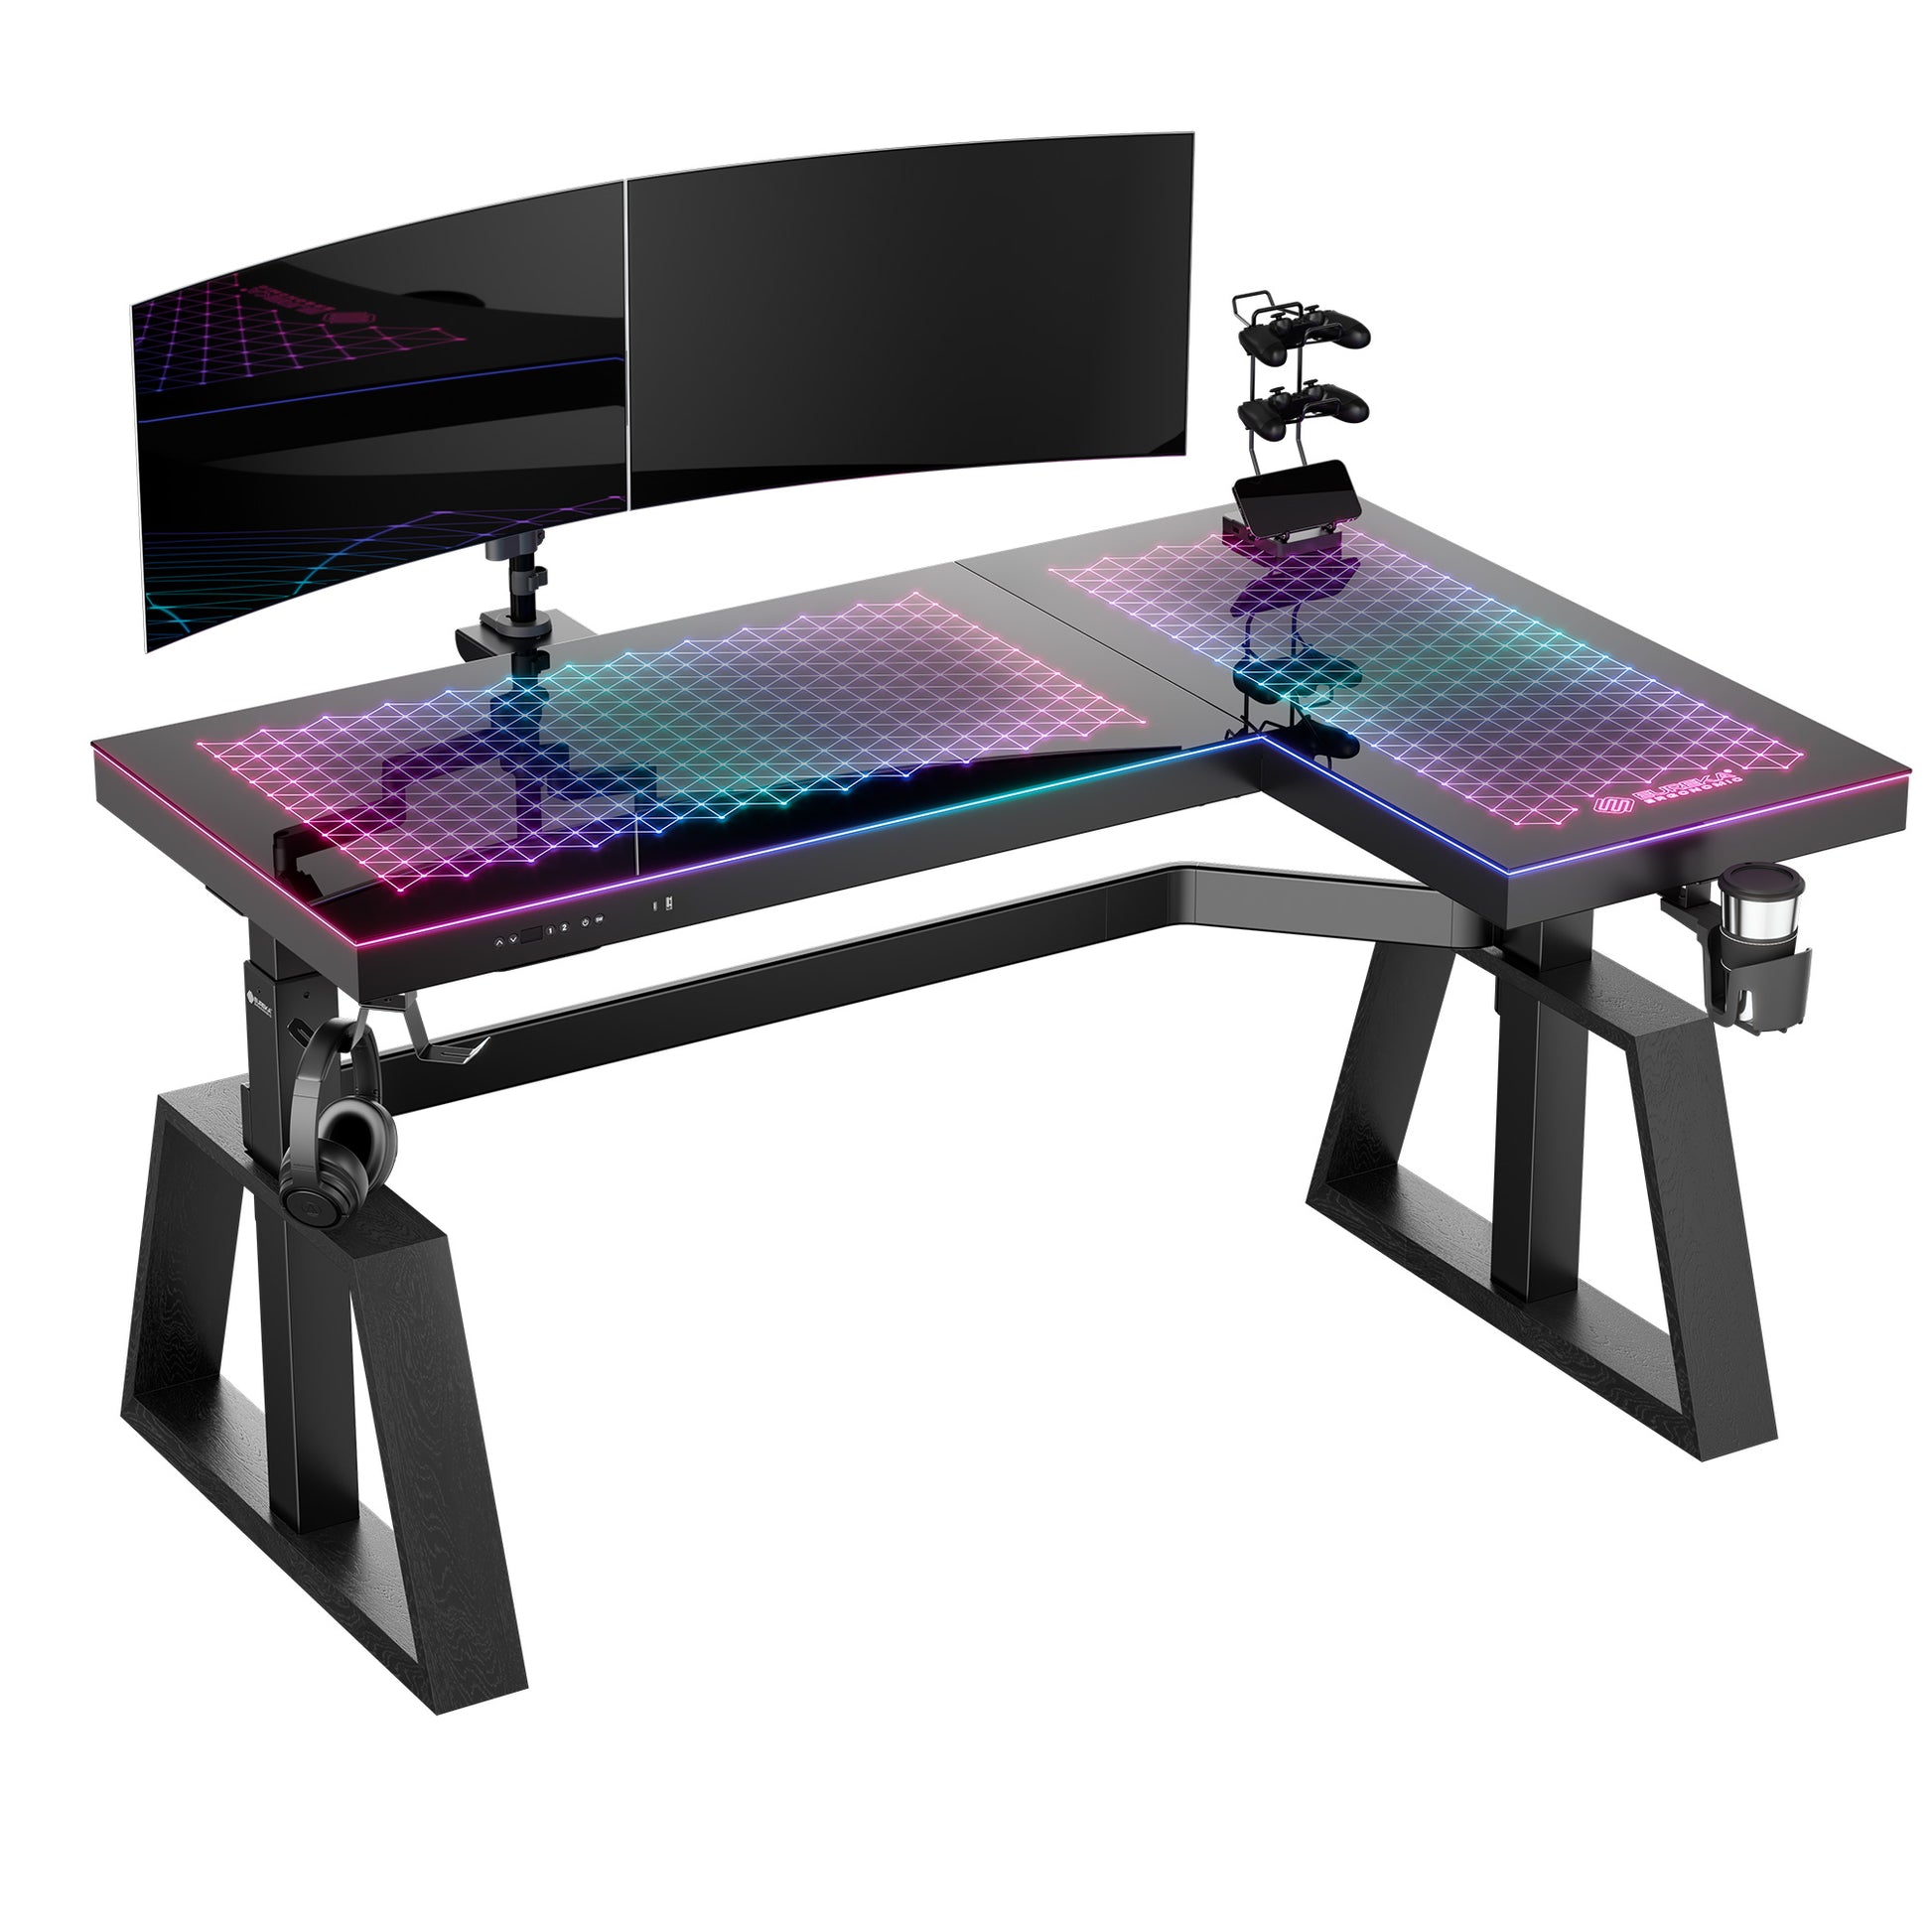 GTG-L60 PRO, L-Shaped Glass Desktop Gaming Standing Desk, Black-colored, Right Sided, RGB Light Up Gaming Desk, Glass Top, Product Image